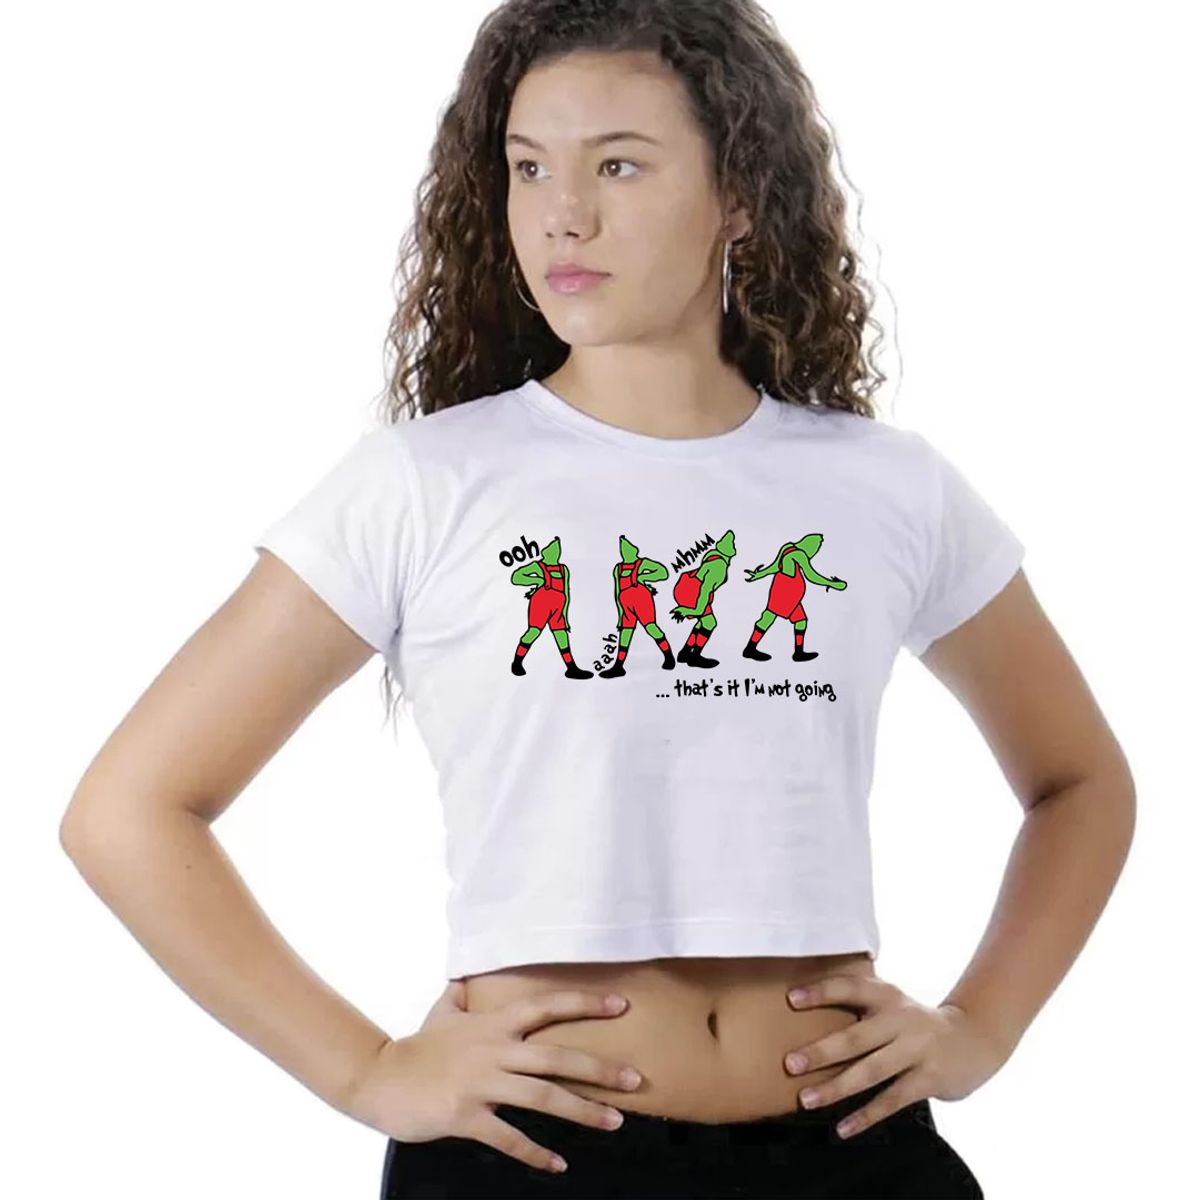 Nome do produto: Camiseta Cropped Grinch Thats It Im Not Going